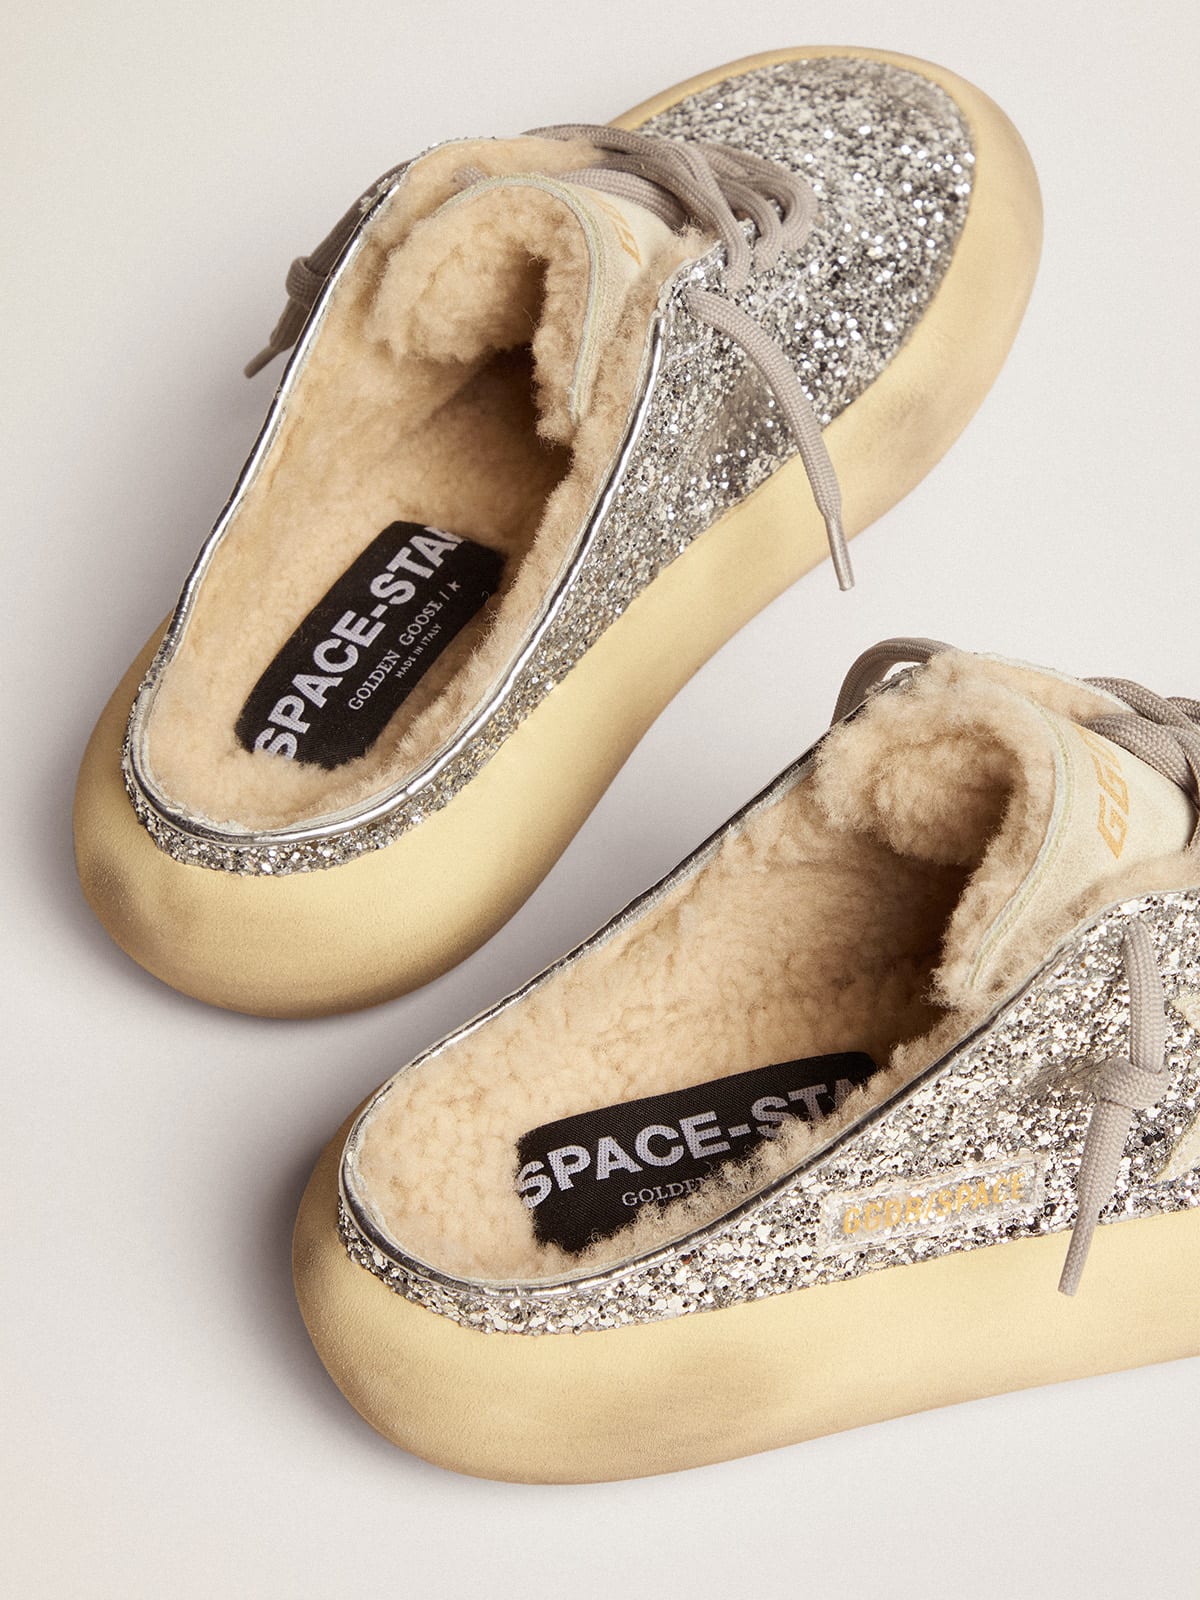 Golden Goose - Space-Star Sabot Donna in glitter argento e fodera in shearling in 